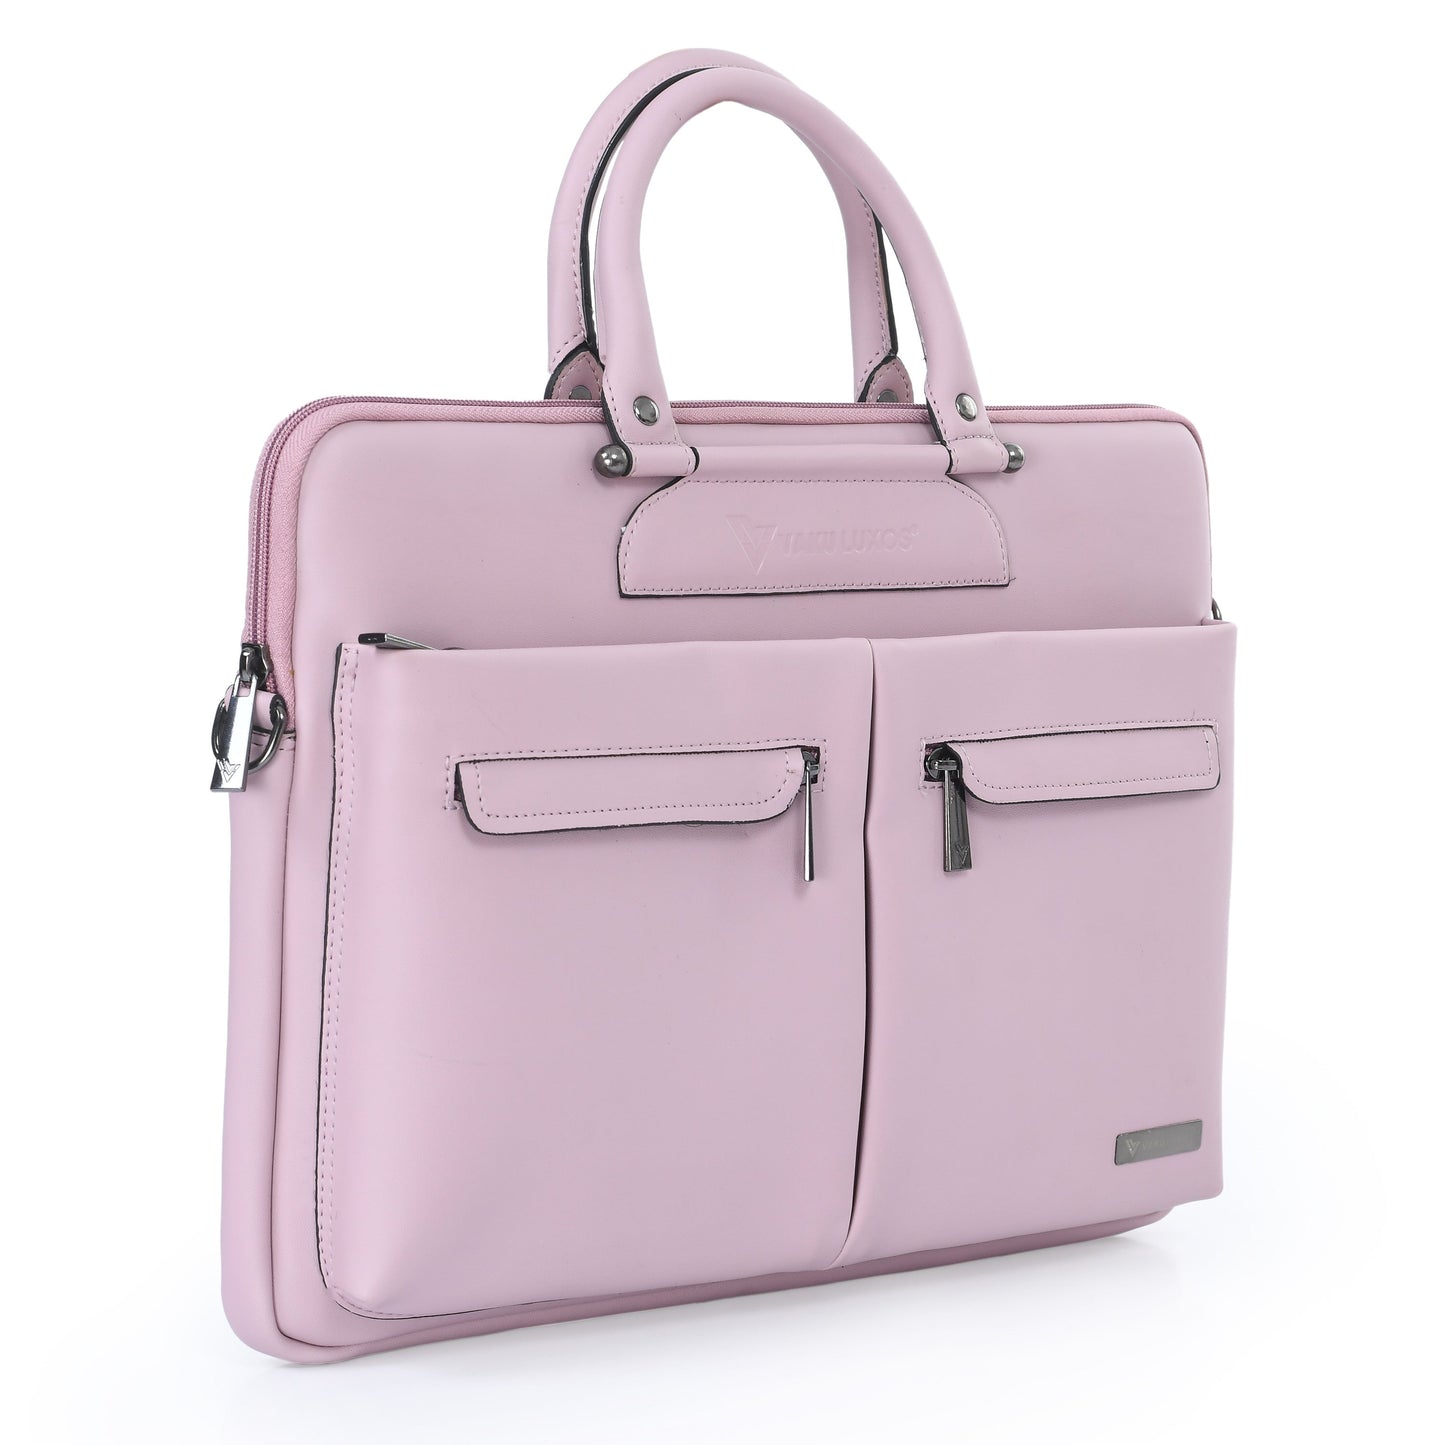 vaku-luxos®-marcella-with-2-front-zippered-pockets-sleeve-for-macbook-13-14-with-strap-highly-durable-pink8905129026219